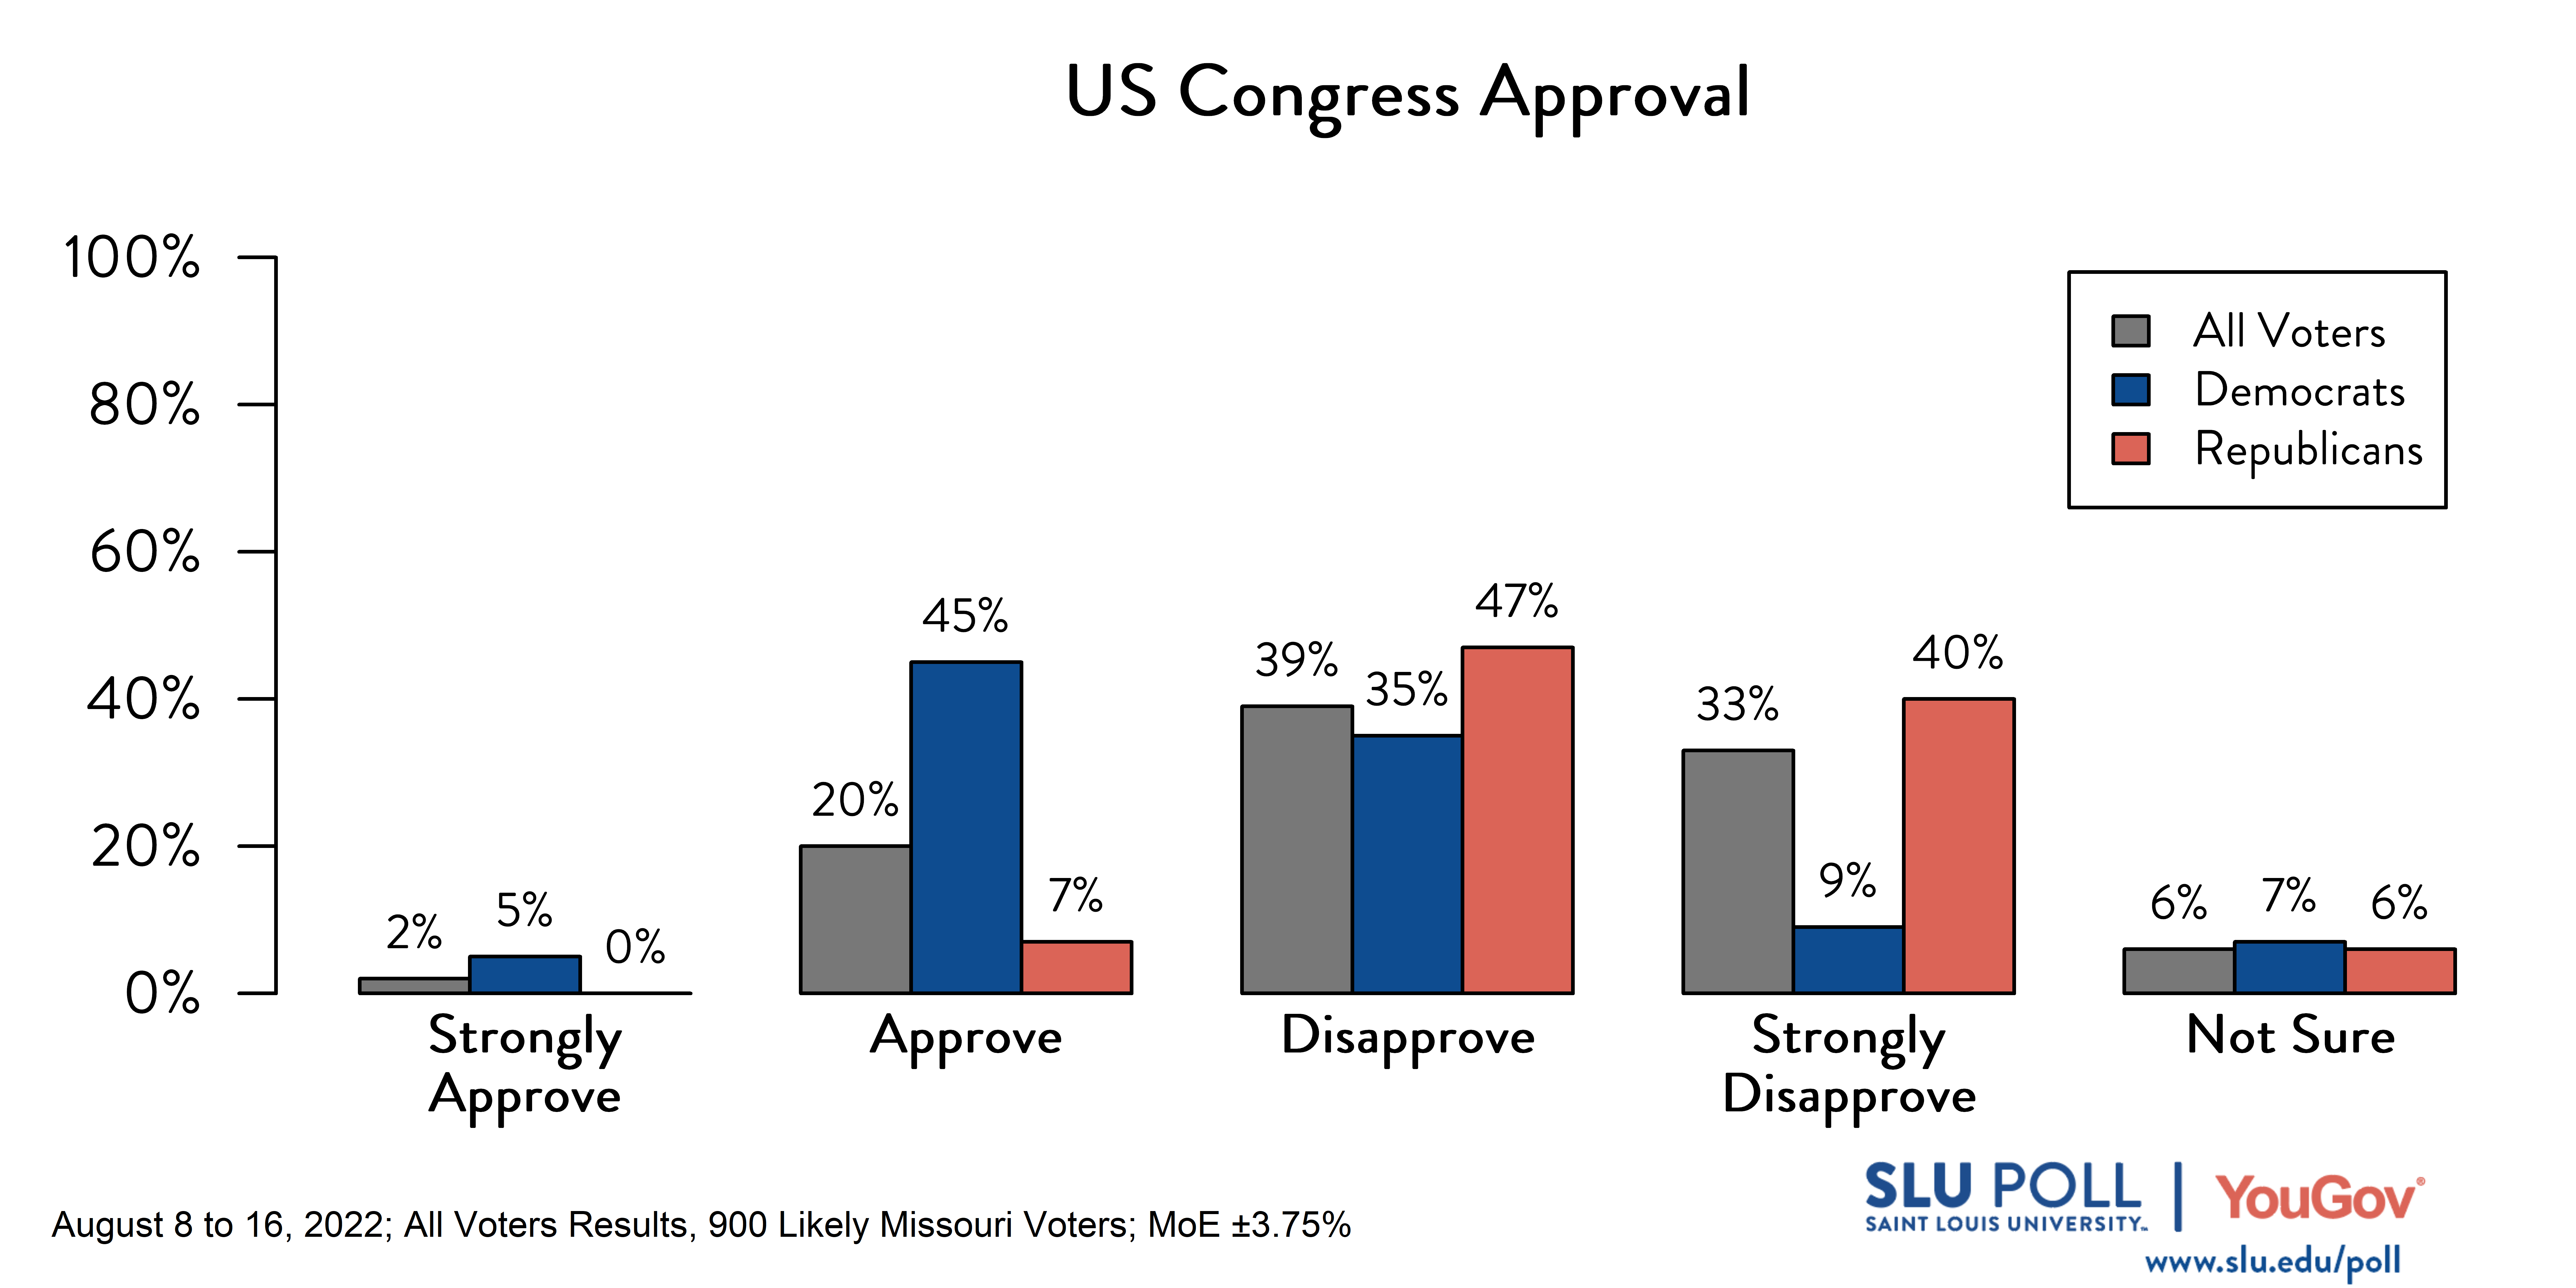 Likely voters' responses to 'Do you approve or disapprove of the way each is doing their job: The US Congress?': 2% Strongly approve, 20% Approve, 39% Disapprove, 33% Strongly disapprove, and 6% Not sure. Democratic voters' responses: ' 5% Strongly approve, 45% Approve, 35% Disapprove, 9% Strongly disapprove, and 7% Not sure. Republican voters' responses: 0% Strongly approve, 7% Approve, 47% Disapprove, 40% Strongly disapprove, and 6% Not sure. 